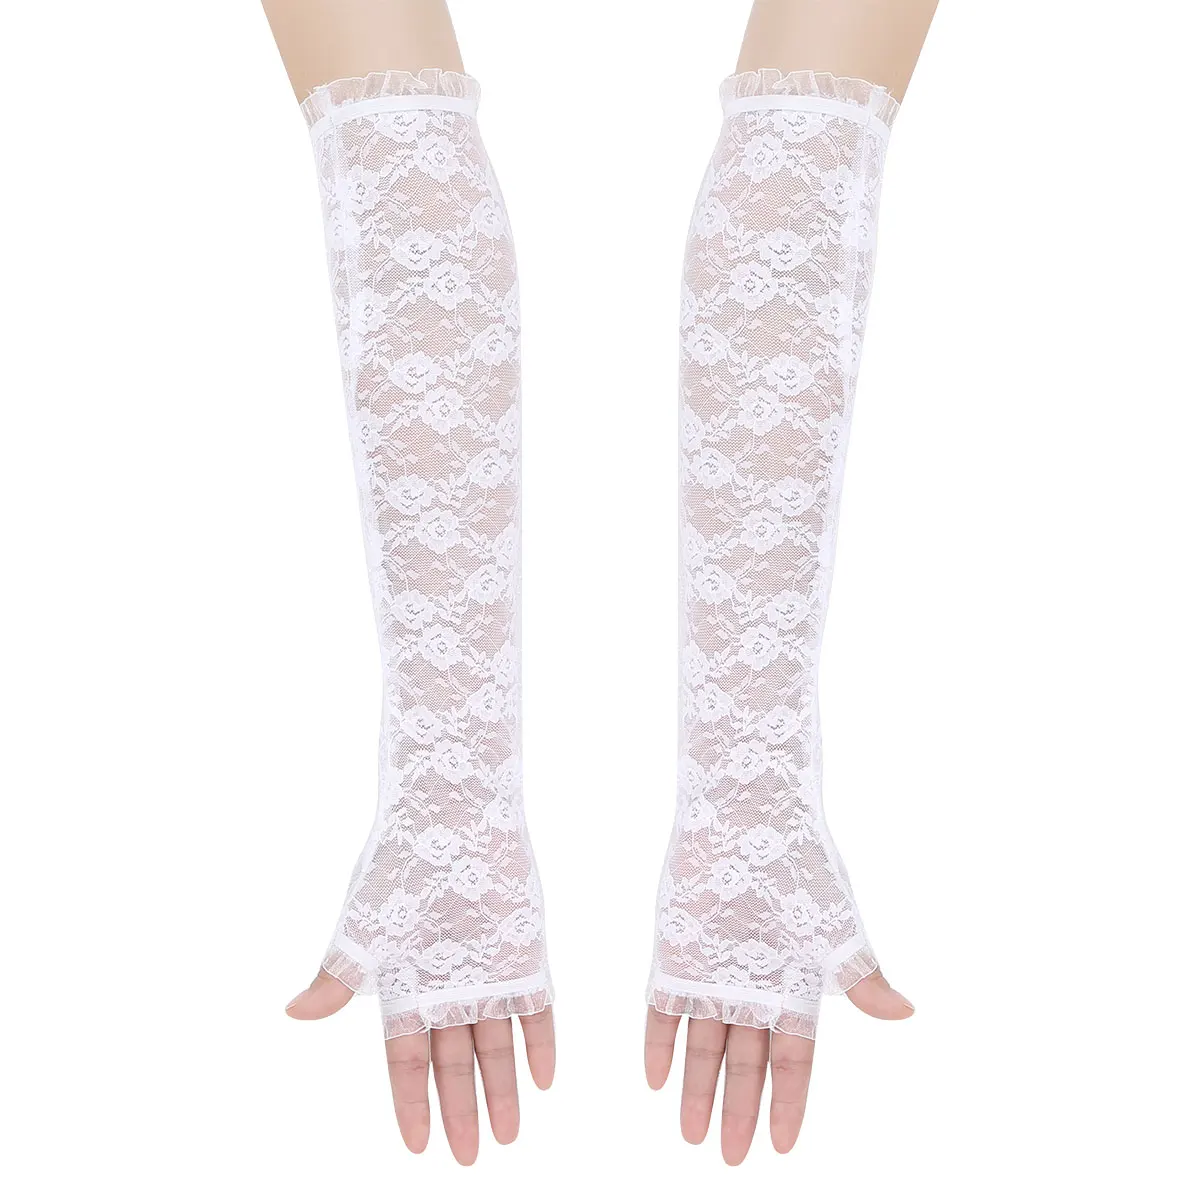 Fingerless Sexy Lace Hollow Out Women Long Gloves Transparent Ladies UV Protection Exquisite Girl Wedding Gloves Accessories New images - 6